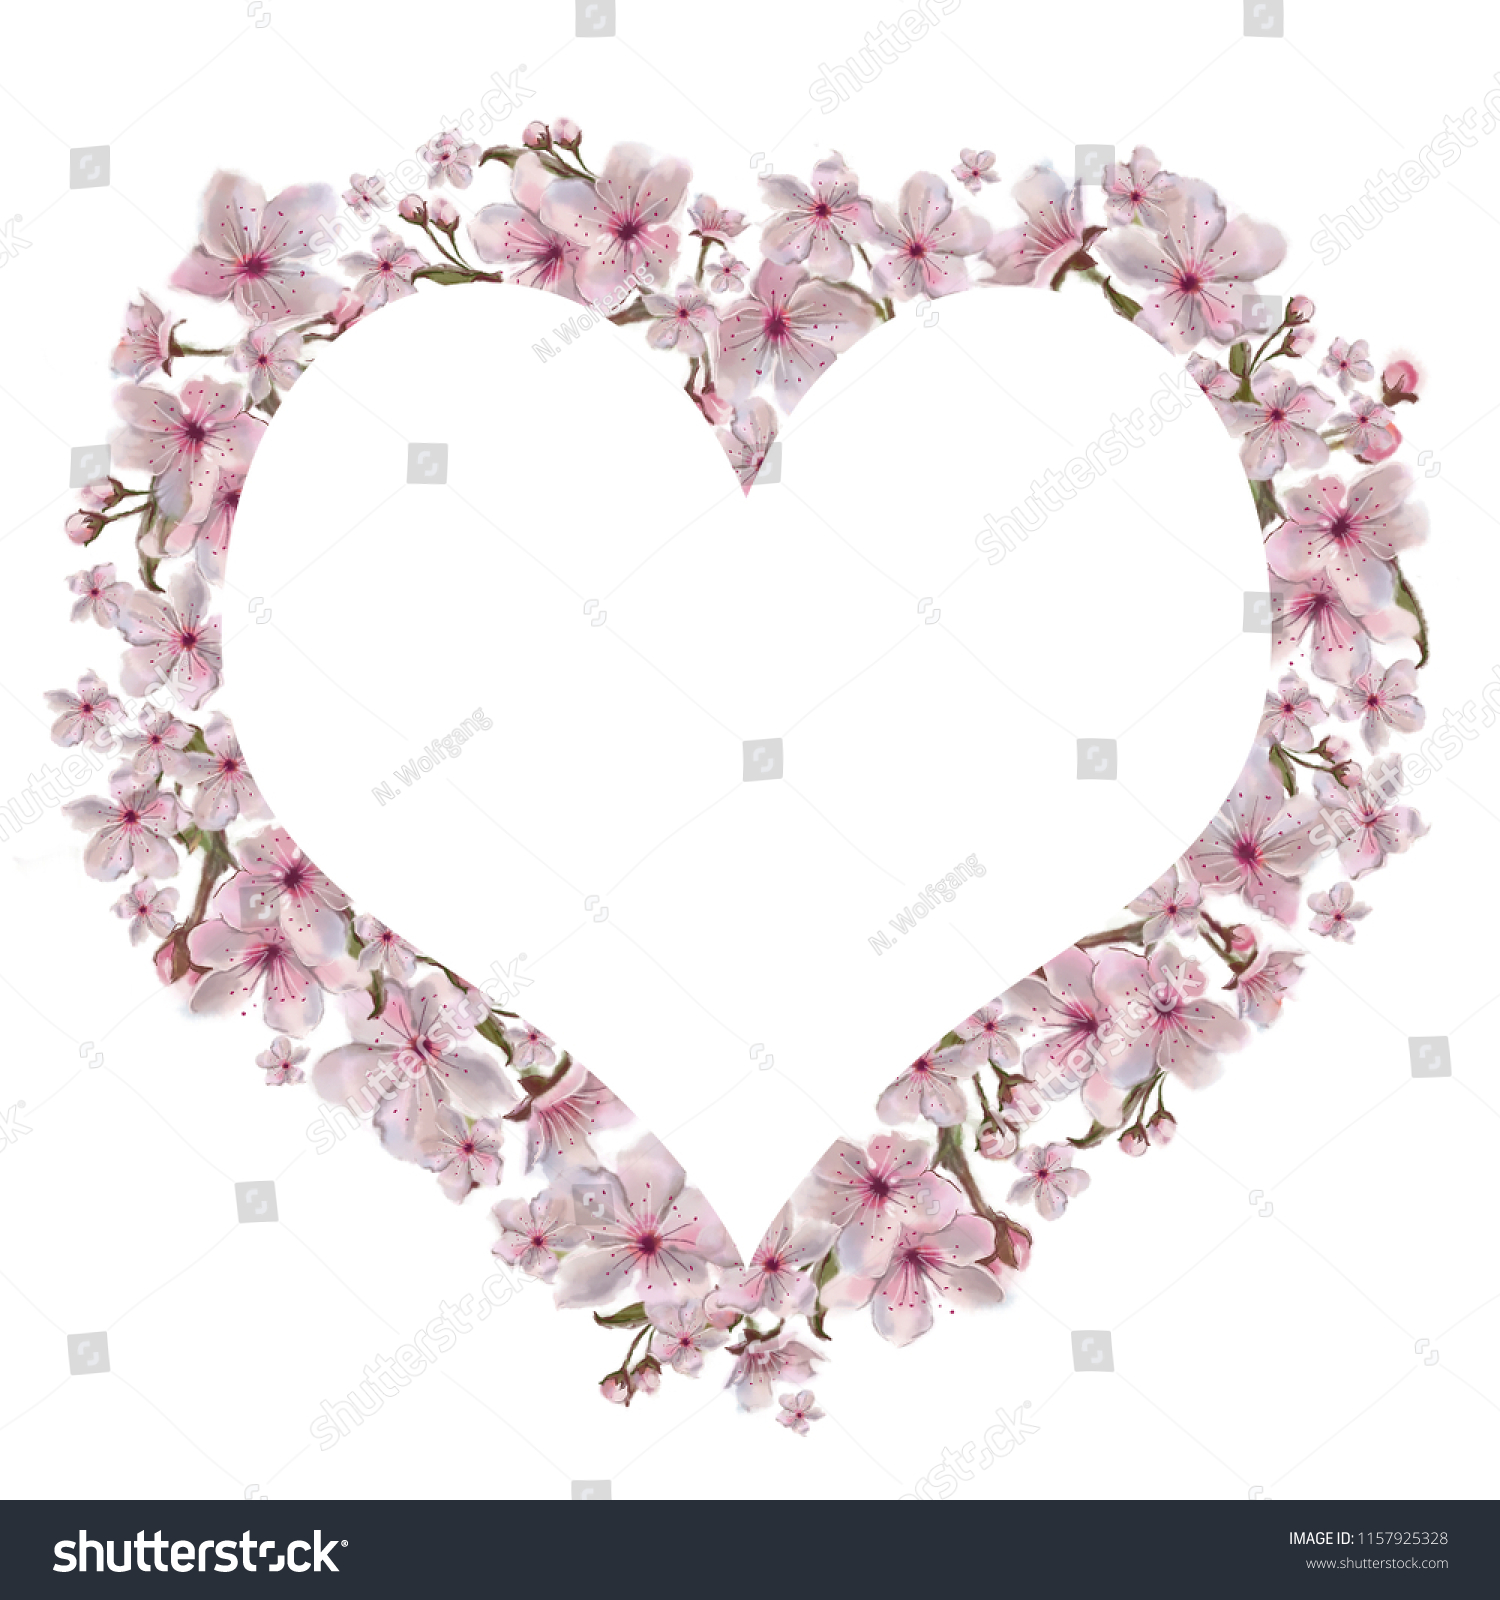 heart shaped template decorated pink spring stock illustration 1157925328